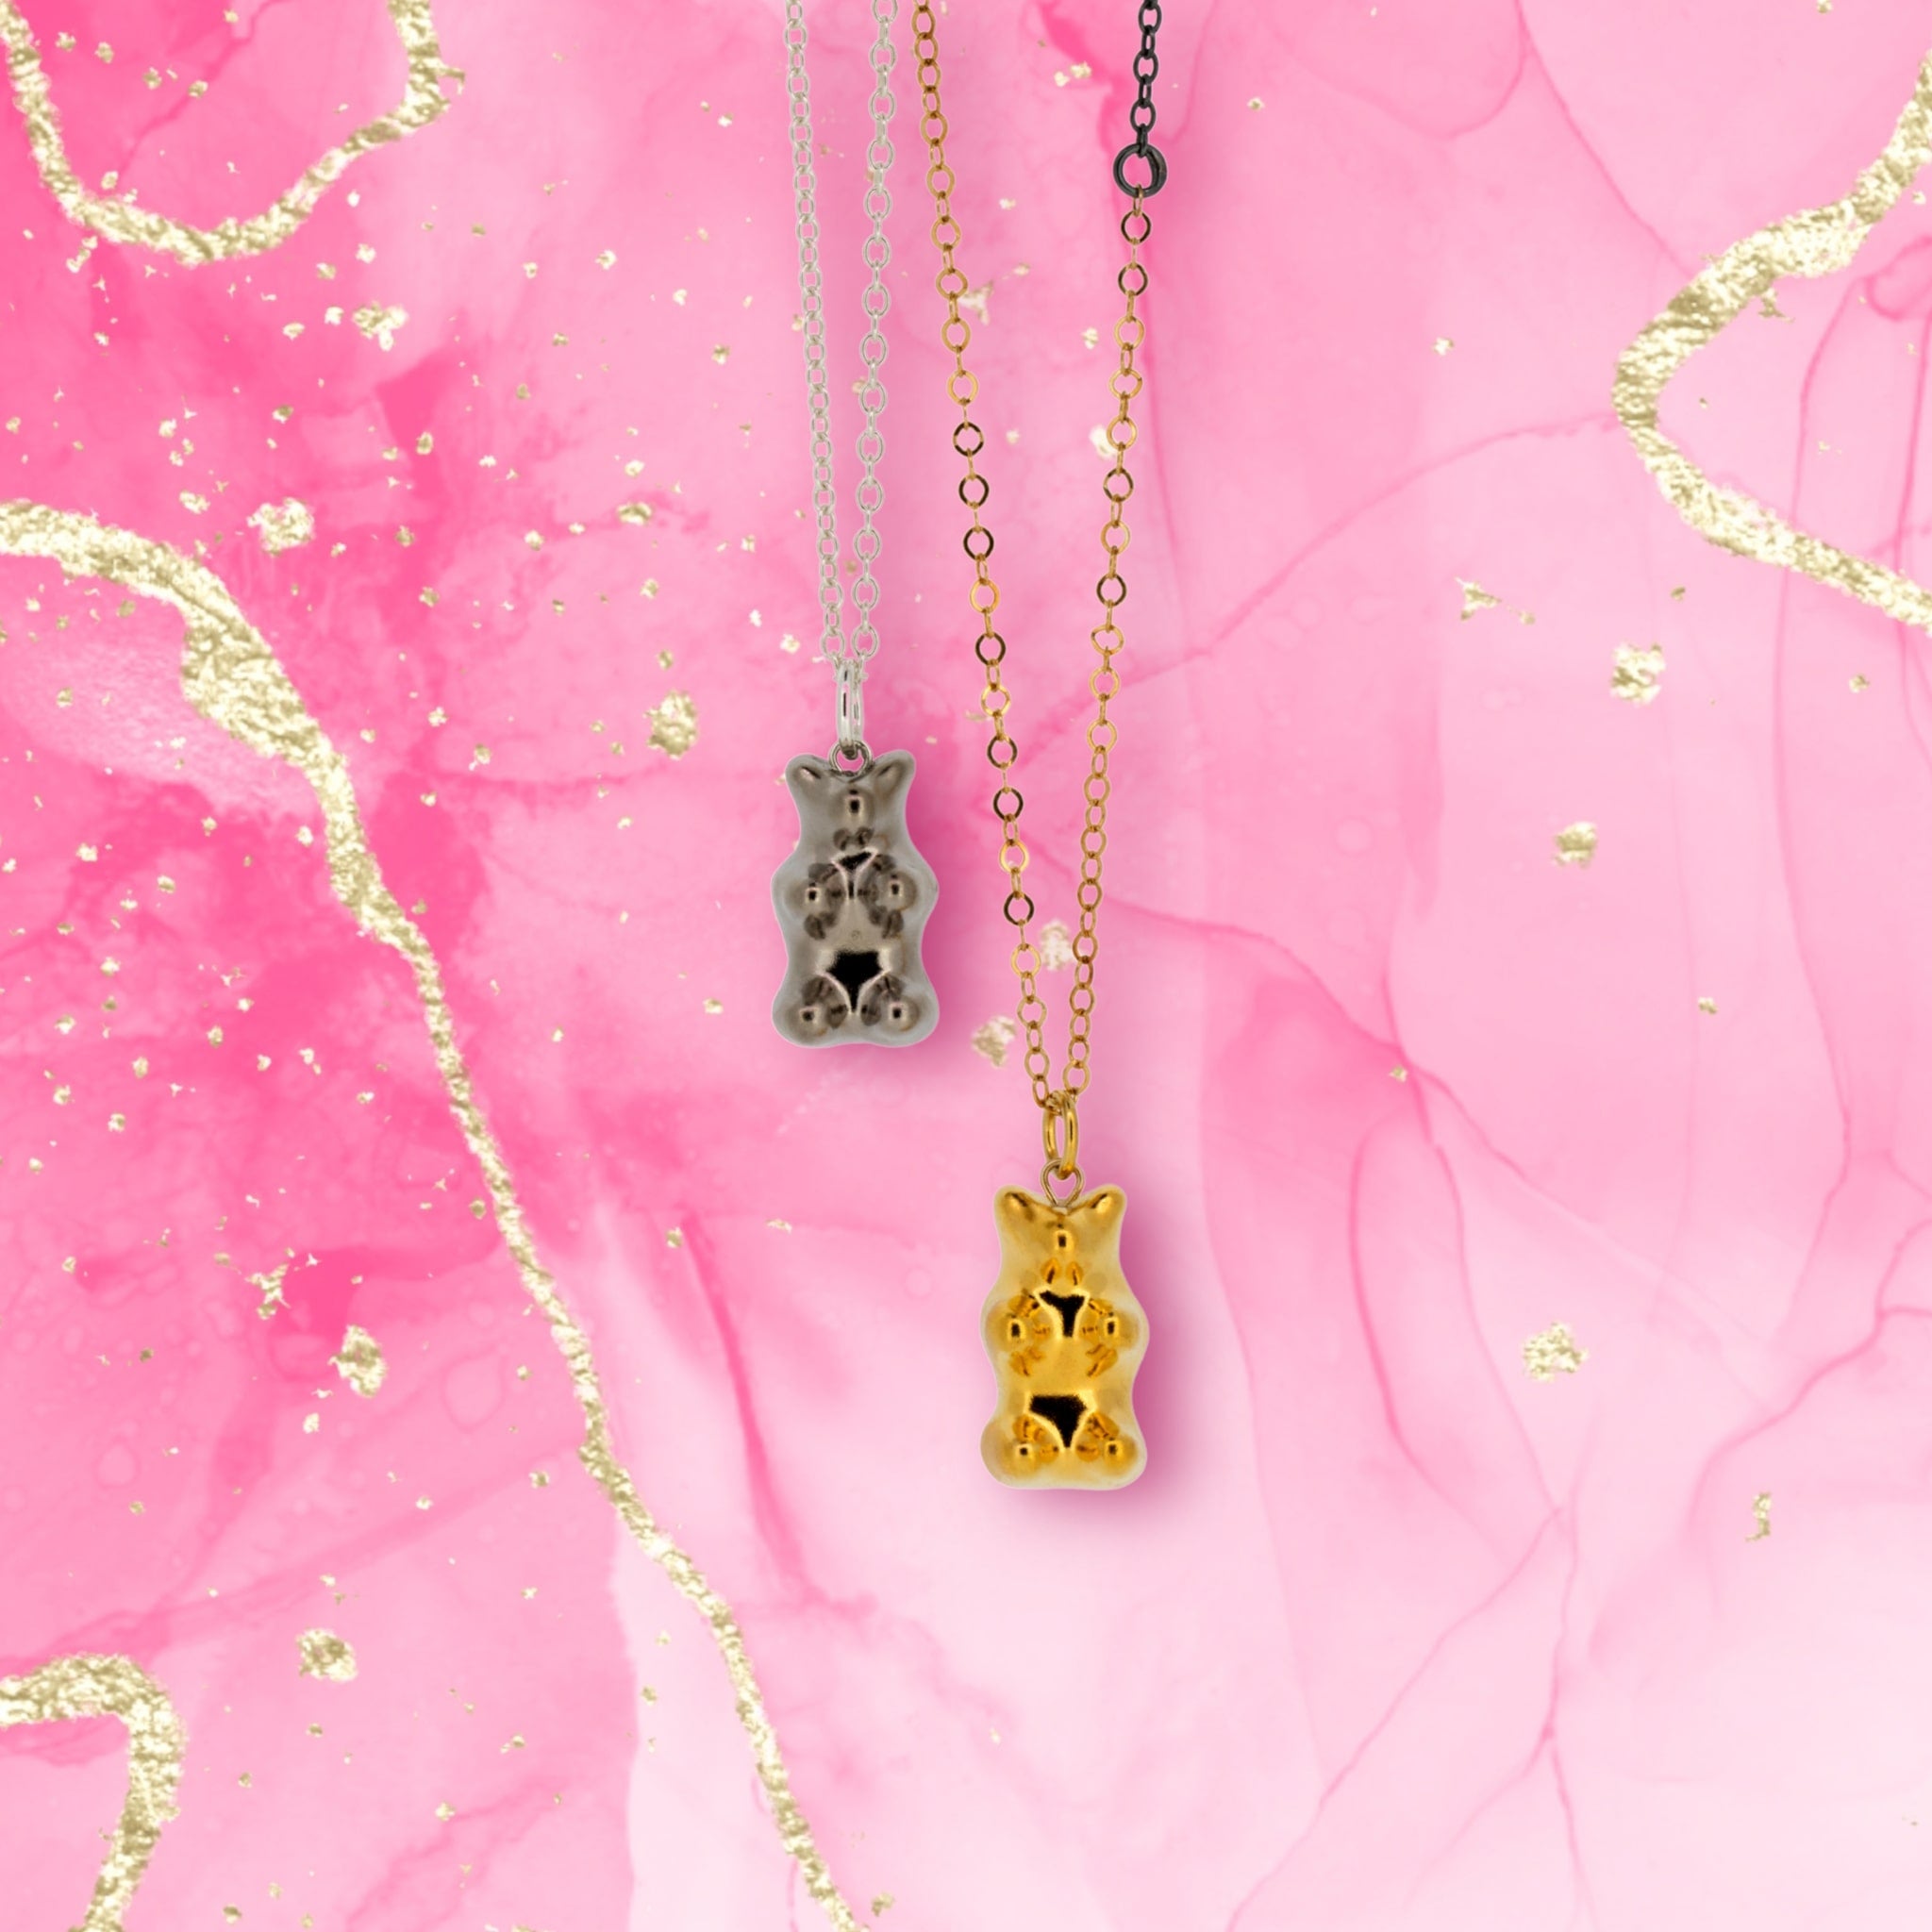 gold_and_silver_gummy_bear_necklaces_pink_background-min.jpg